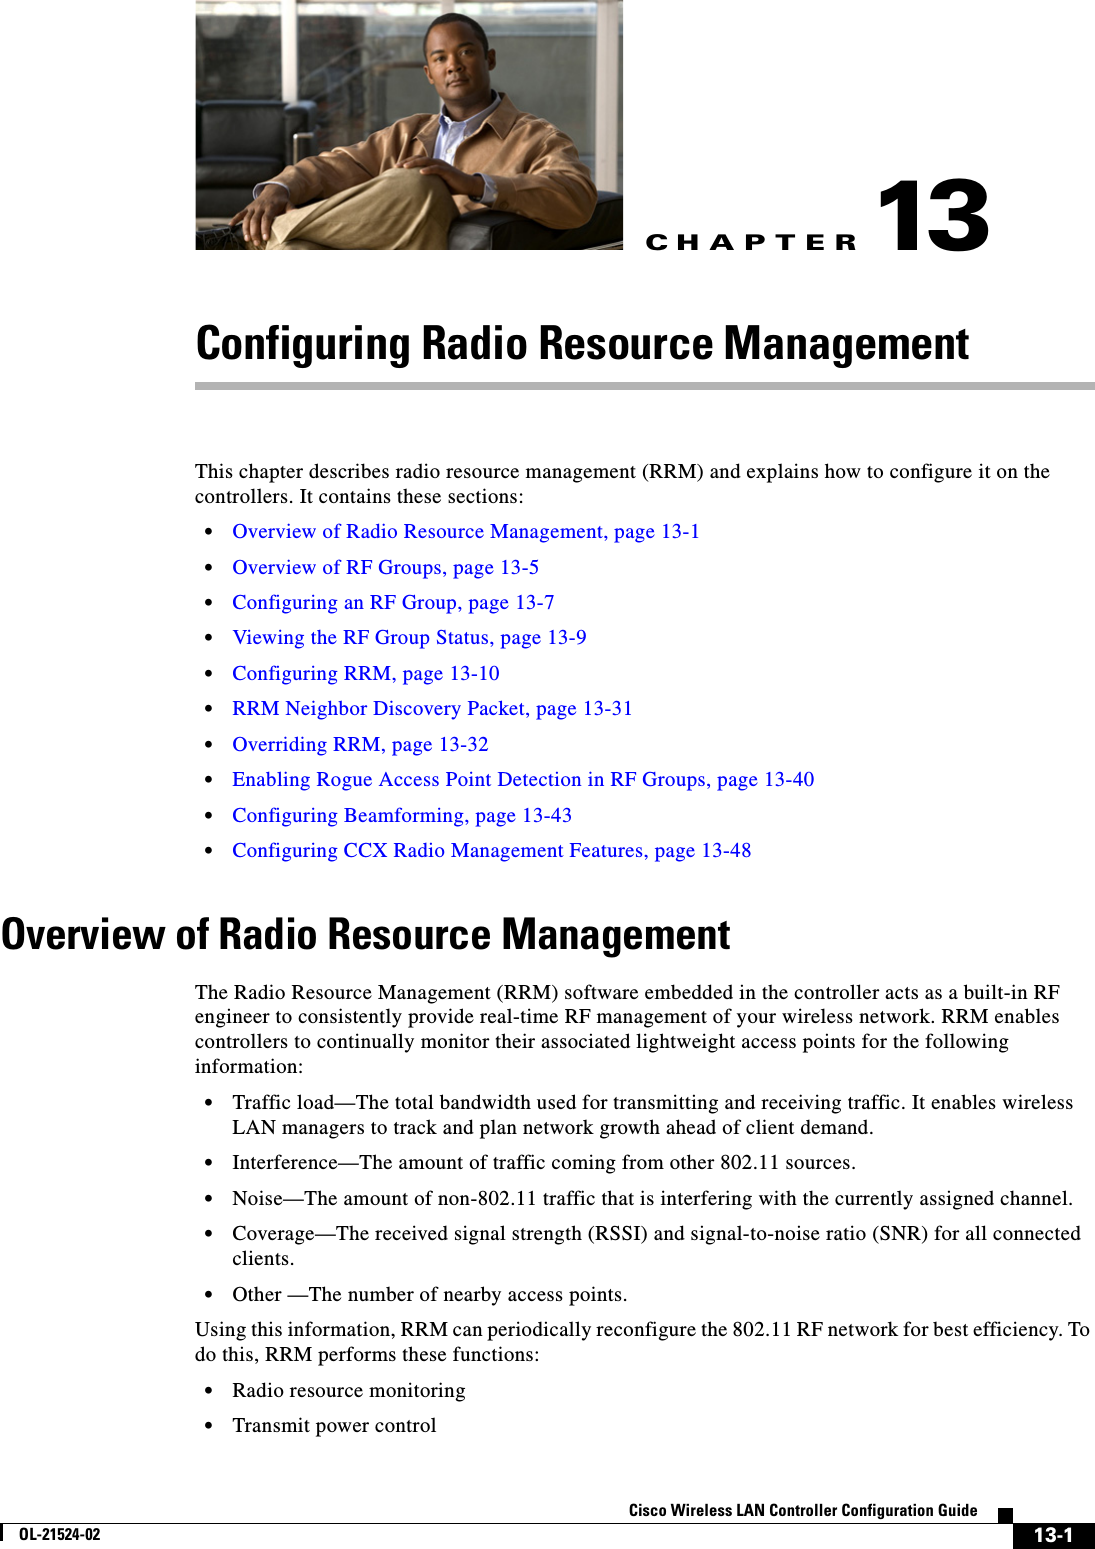 CHAPTER13-1Cisco Wireless LAN Controller Configuration GuideOL-21524-0213Configuring Radio Resource ManagementThis chapter describes radio resource management (RRM) and explains how to configure it on the controllers. It contains these sections:  • Overview of Radio Resource Management, page 13-1  • Overview of RF Groups, page 13-5  • Configuring an RF Group, page 13-7  • Viewing the RF Group Status, page 13-9  • Configuring RRM, page 13-10  • RRM Neighbor Discovery Packet, page 13-31  • Overriding RRM, page 13-32  • Enabling Rogue Access Point Detection in RF Groups, page 13-40  • Configuring Beamforming, page 13-43  • Configuring CCX Radio Management Features, page 13-48Overview of Radio Resource ManagementThe Radio Resource Management (RRM) software embedded in the controller acts as a built-in RF engineer to consistently provide real-time RF management of your wireless network. RRM enables controllers to continually monitor their associated lightweight access points for the following information:   • Traffic load—The total bandwidth used for transmitting and receiving traffic. It enables wireless LAN managers to track and plan network growth ahead of client demand.  • Interference—The amount of traffic coming from other 802.11 sources.  • Noise—The amount of non-802.11 traffic that is interfering with the currently assigned channel.  • Coverage—The received signal strength (RSSI) and signal-to-noise ratio (SNR) for all connected clients.  • Other —The number of nearby access points.Using this information, RRM can periodically reconfigure the 802.11 RF network for best efficiency. To do this, RRM performs these functions:  • Radio resource monitoring  • Transmit power control